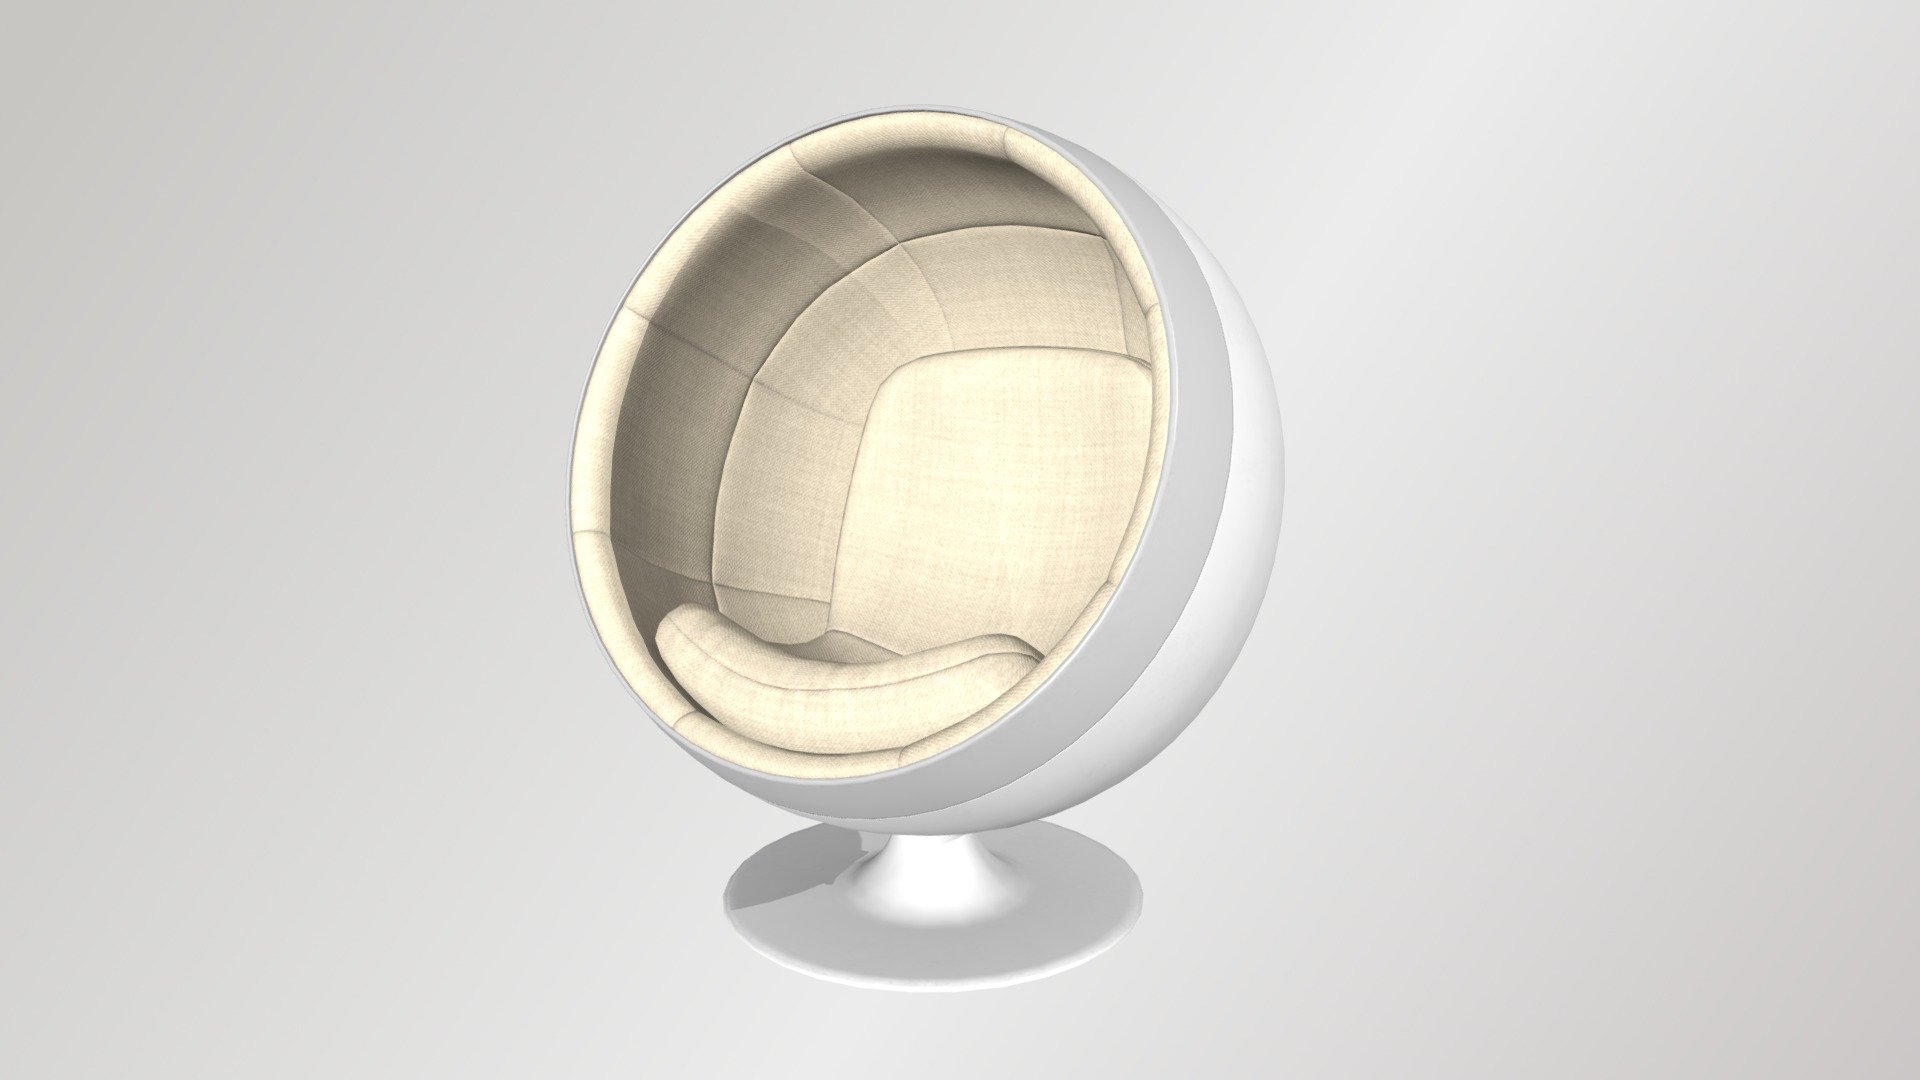 Round Futuristic Armchair with unique design

High-poly and low-poly versions are included

Ready for Virtual Reality (VR), Augmented Reality (AR), metaverses, 3D tours, games and other real-time apps, as well as for advertising and commercial, etc.




Pivot Point at x0, y0, z0

Clean UV

Game-ready

Real-world size

Clear naming

Fully textured with all materials applied

PBR 

Textures:




All materials and textures are included

Textures in 4k, 2k, 1k textures

1k, 2k textures: Albedo, Rough, Metal, ORM in JPEG; Normal in PNG

4k textures: in PNG

Normal map type - OpenGL

Formats:
High-poly model:




FBX with packed textures

OBJ + MTL

blend

Low-poly model:




FBX with packed textures

OBJ + MTL

GLB + USDZ

blend with 4k textures for FBX and OBJ

blend with 2k textures for GLB

If you experience any difficulties while using the models, we will be more than happy to offer our qualified assistance. Thank you for choosing our 3D models!

Sincerely yours,

CyberFox team - Round Futuristic Armchair - Buy Royalty Free 3D model by CyberFox 3D Studio (@cyberfox3d) 3d model